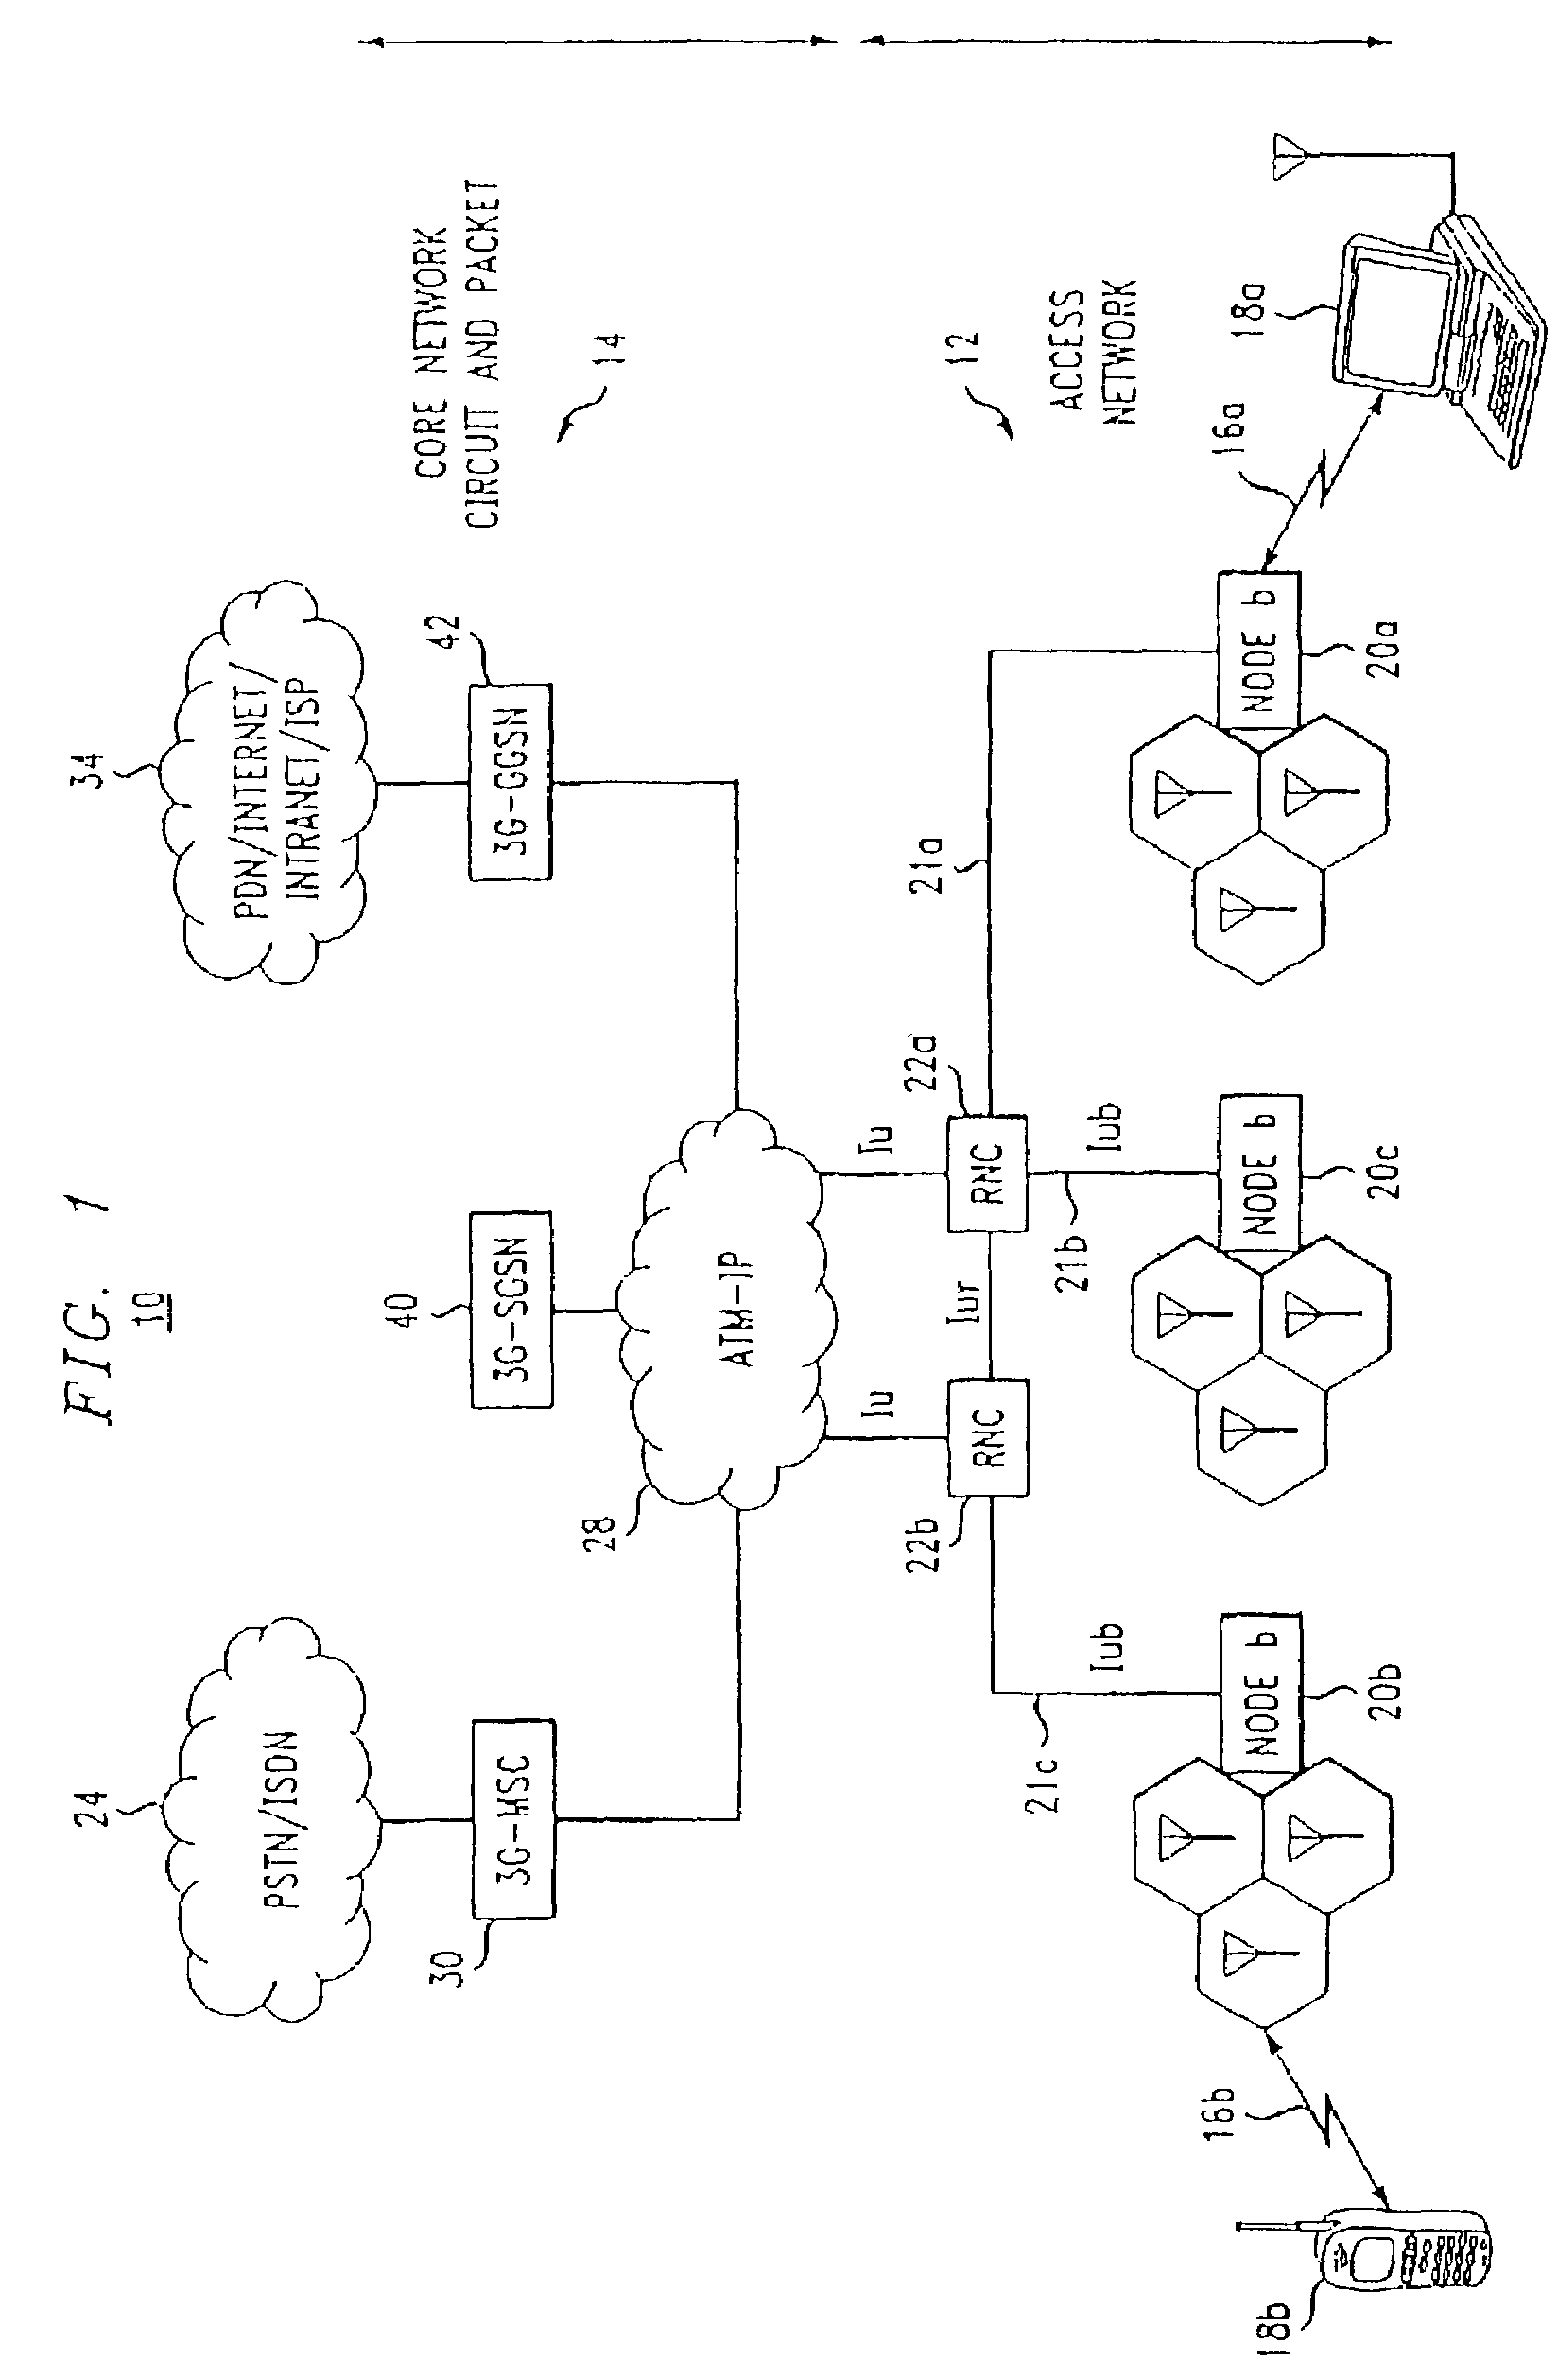 Rate control for multiplexed voice and data in a wireless communications system